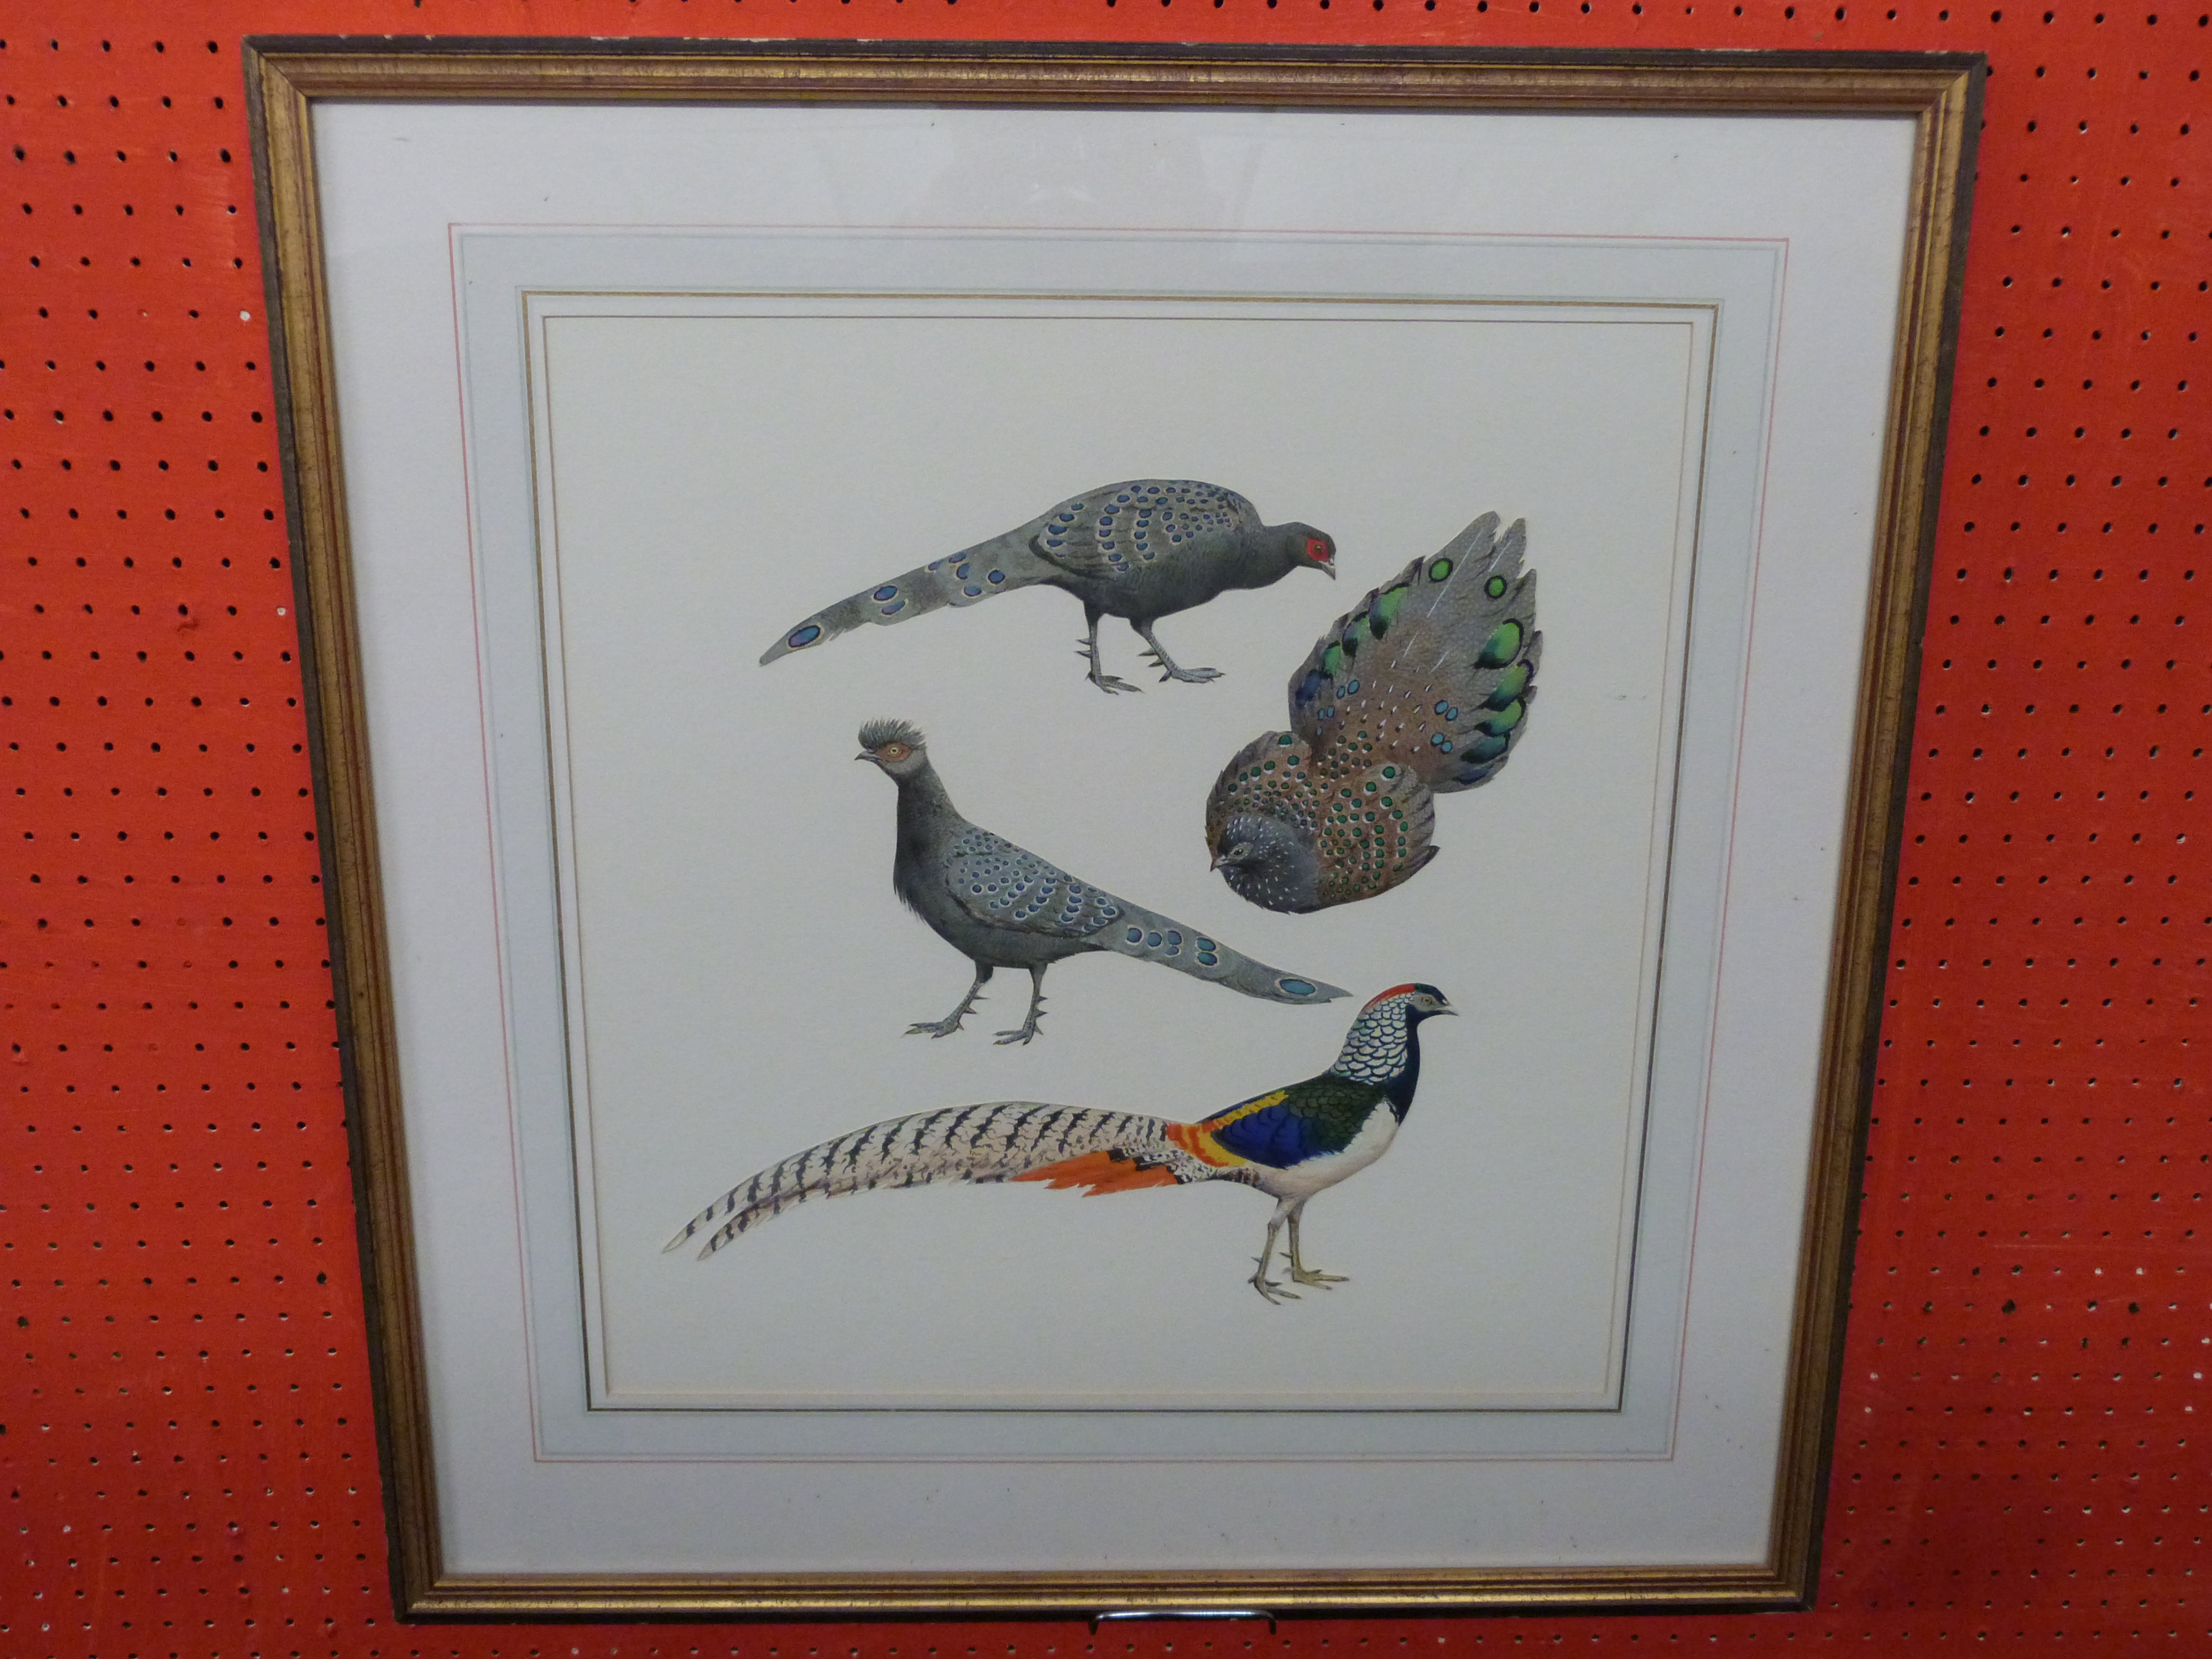 J C Harrison, Watercoulour, four Pheasant Studies (single frame), produced for the book "Pheasants